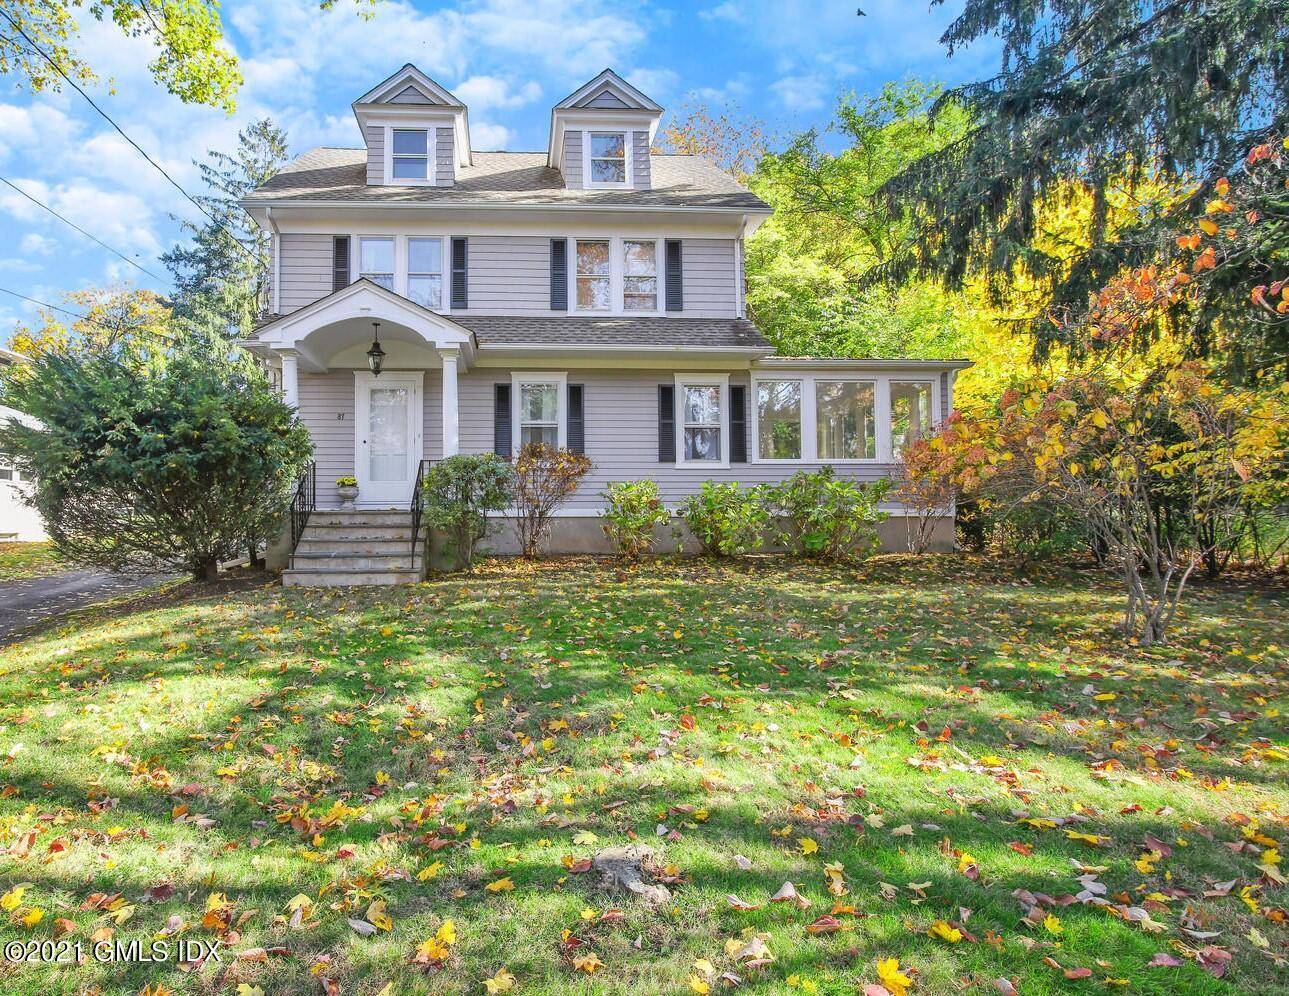 Move right in to this gracious, updated Colonial home in an ideal location convenient to train, schools, specialty shops, restaurants, Cos Cob center, Greenwich Avenue, and several parks including the ...